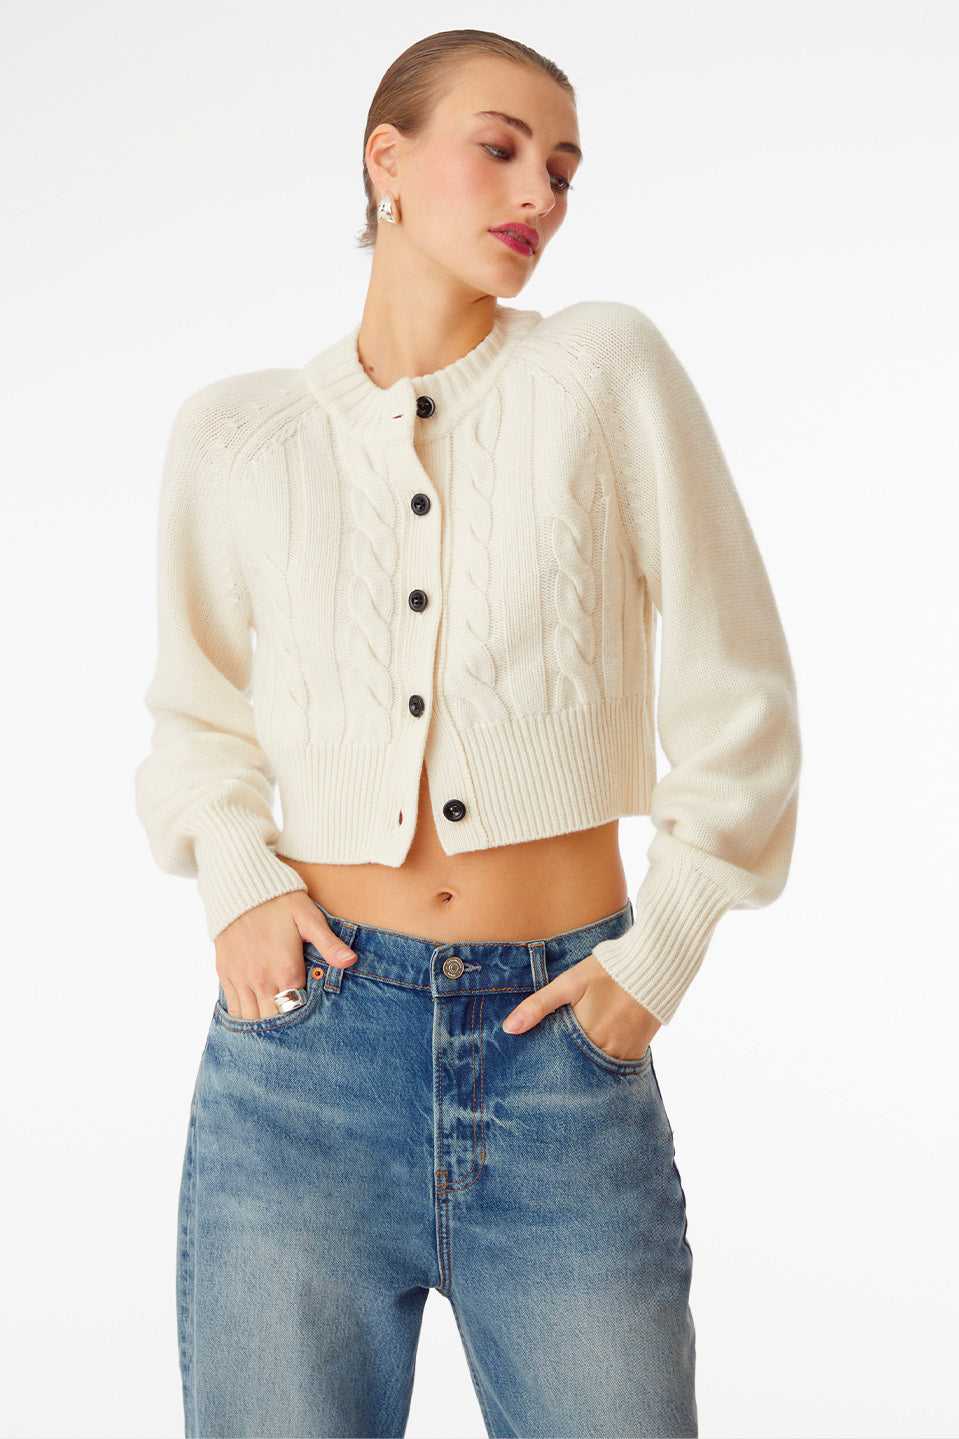 off white cream ivory crop cardigan sweater casual outfit for women